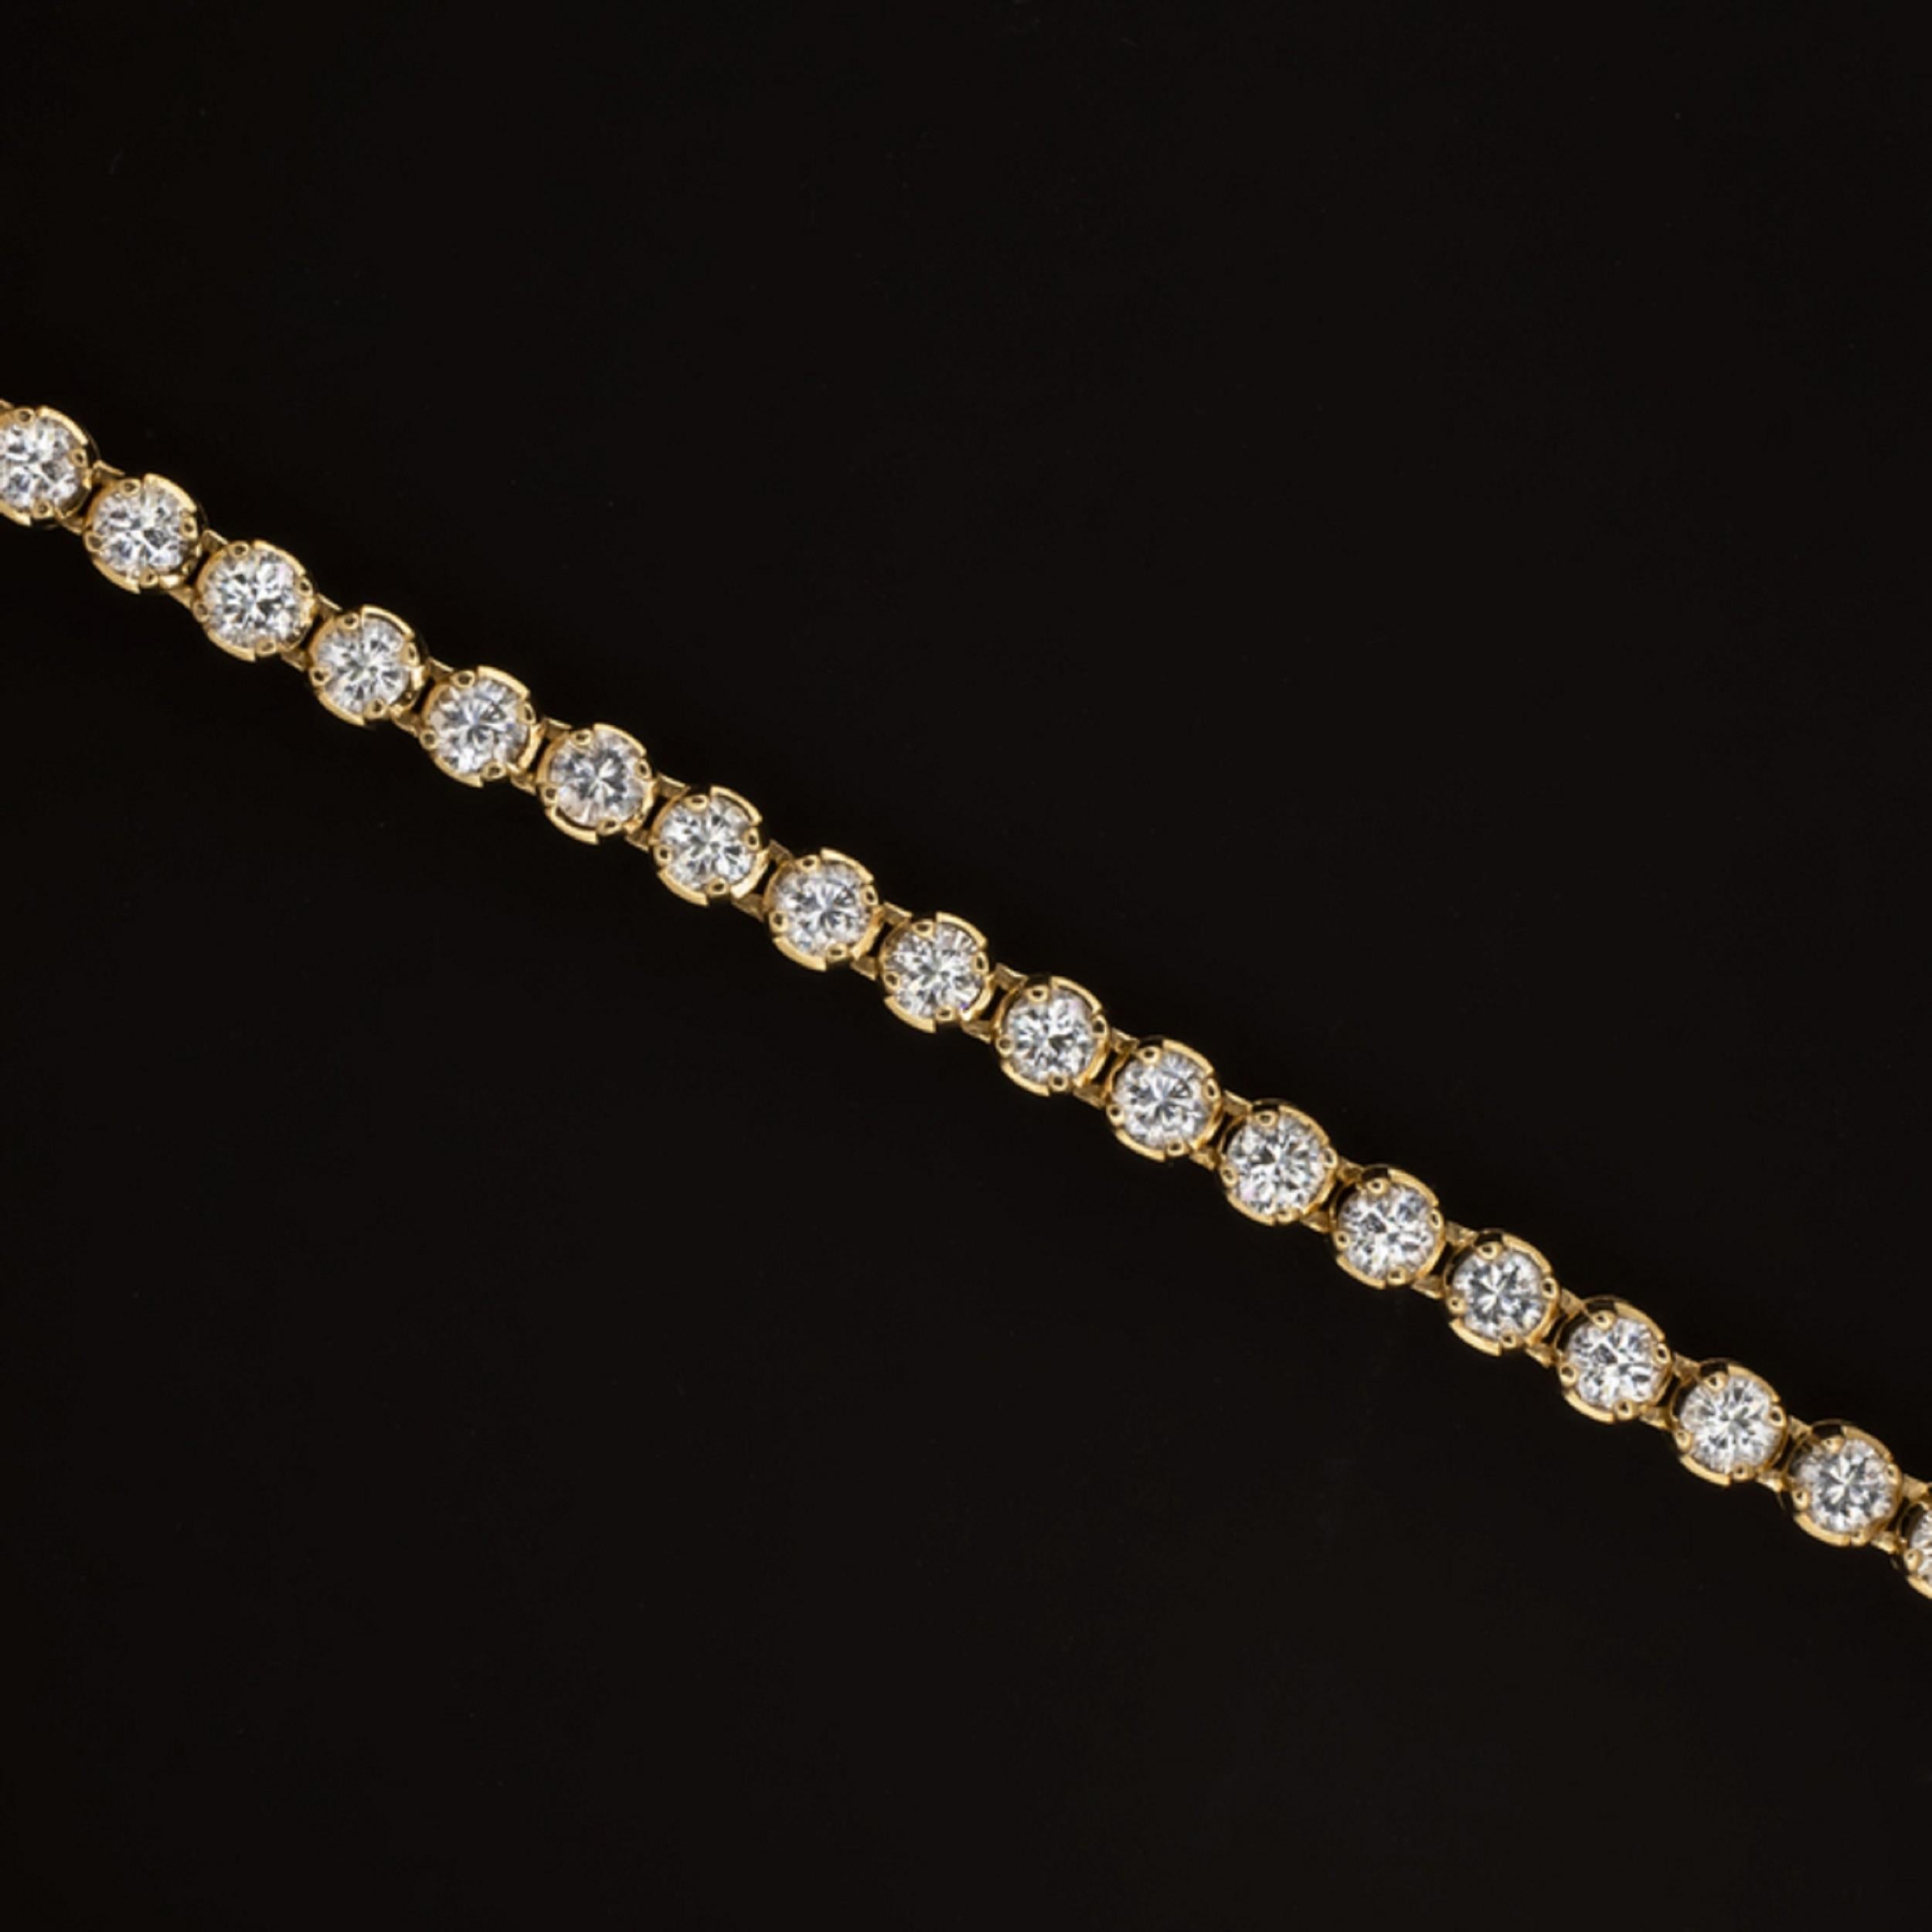 sparkling tennis bracelet has a classic design that will never go out of style! Featuring 5 carats of beautifully white, eye clean diamonds, this beauty offers brilliant, eye catching sparkle. At 0.10ct each, the diamonds are individually sizeable.